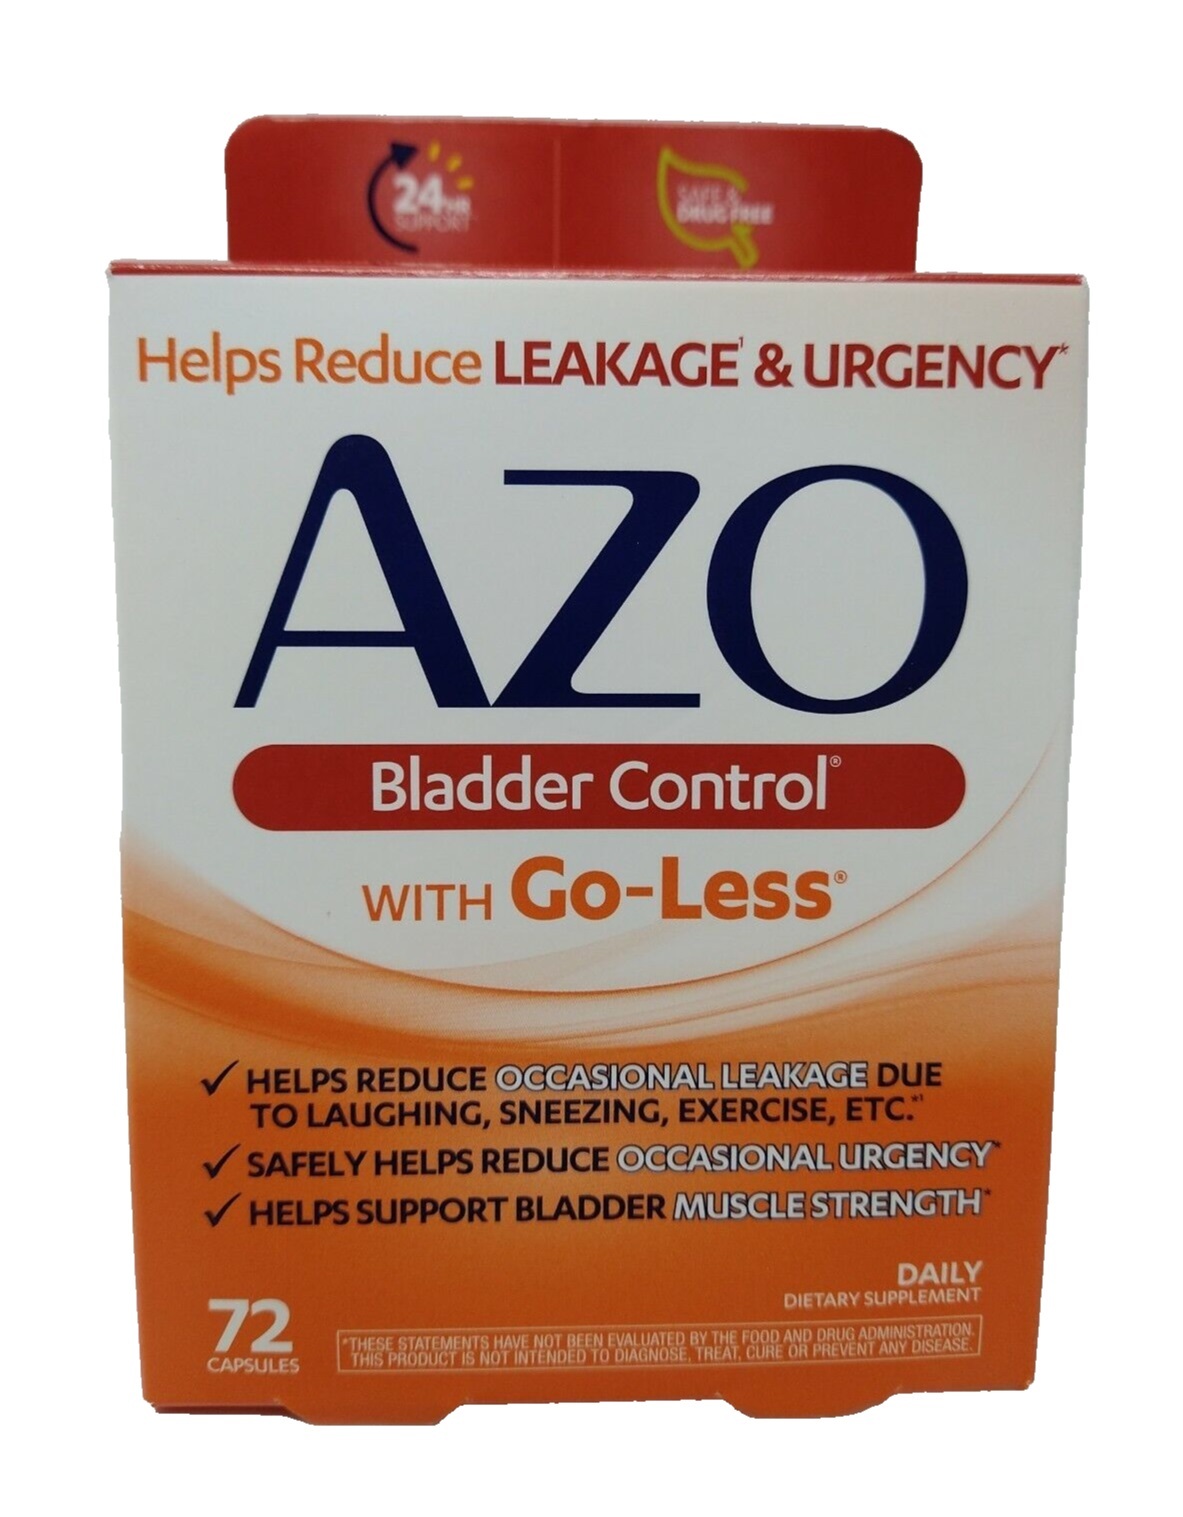 Azo Bladder Control With Go-Less 72 capsules - $39.99